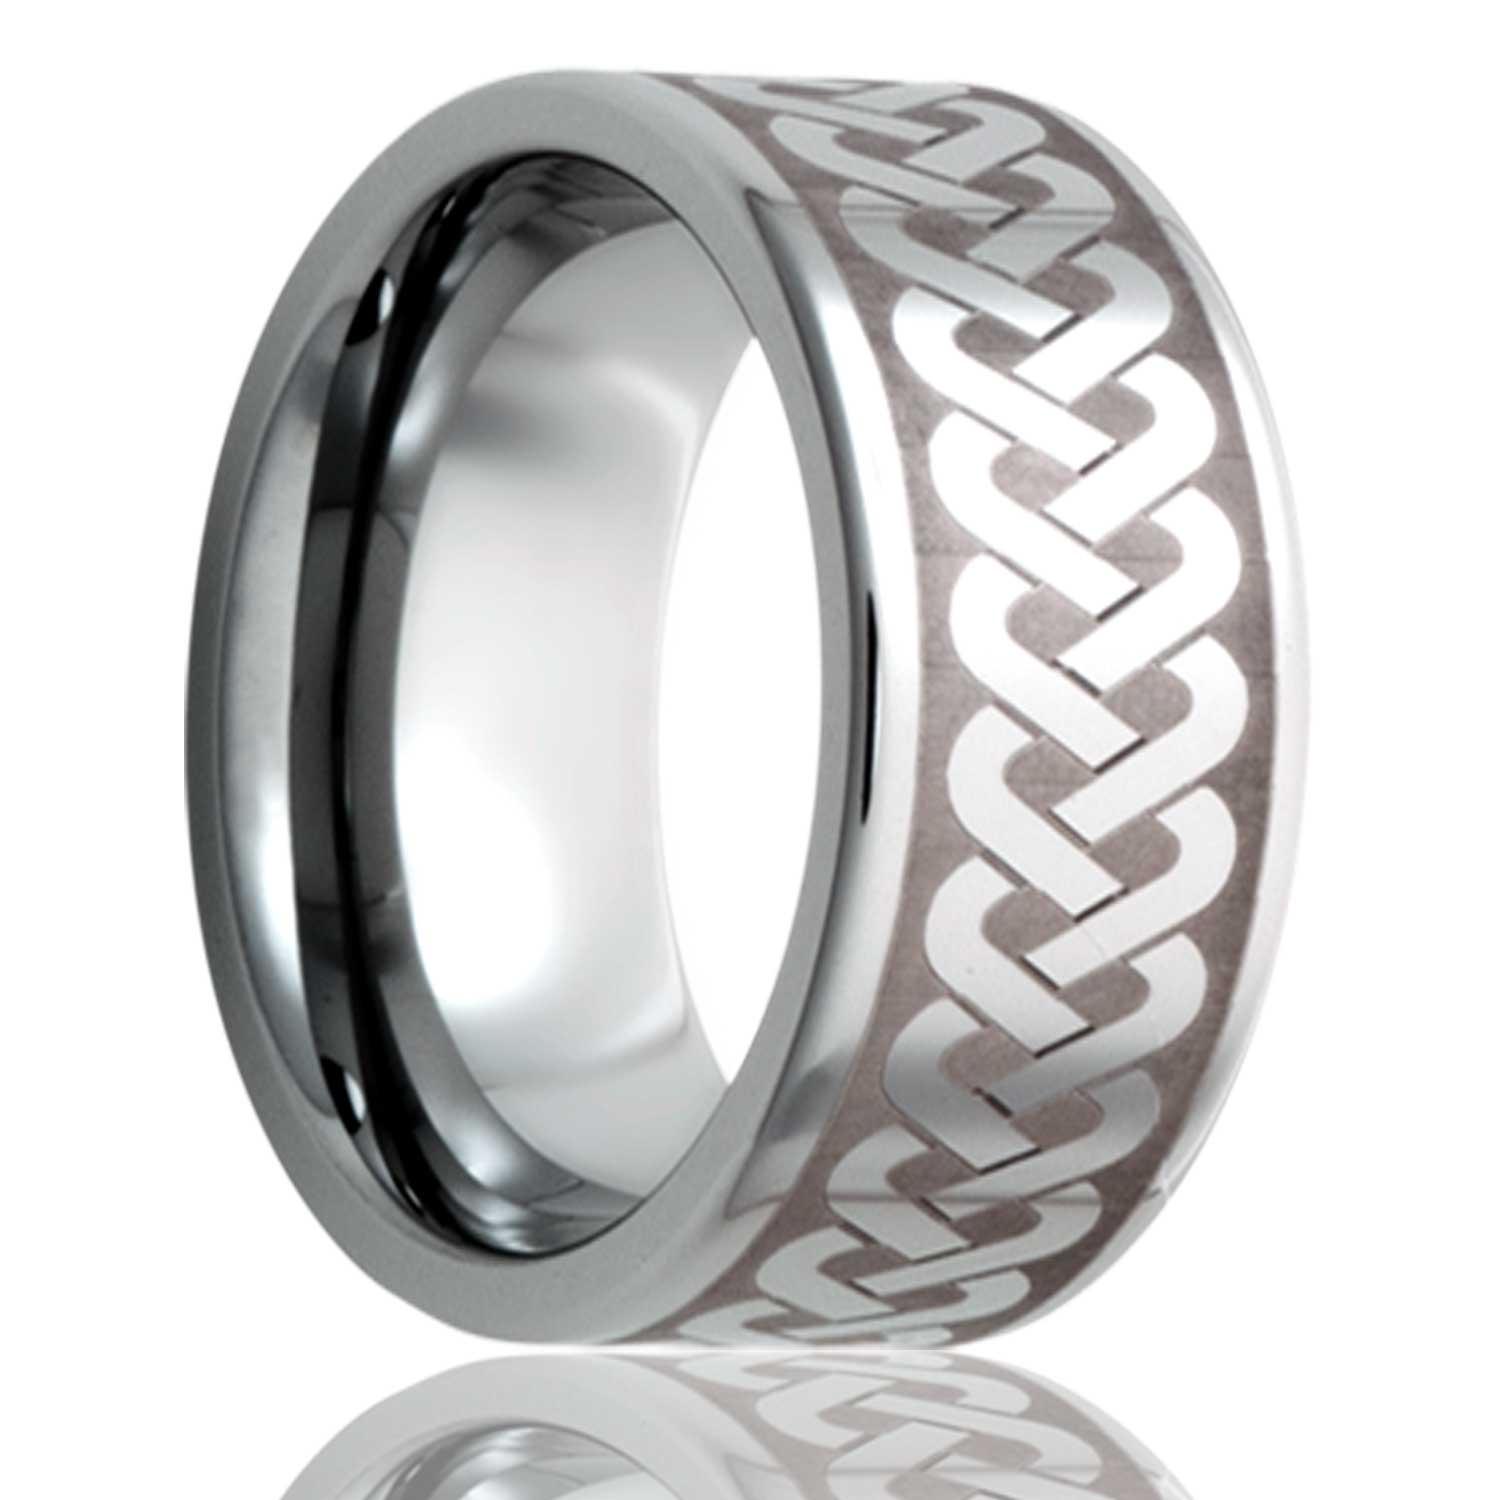 A sailor's celtic knot titanium wedding band displayed on a neutral white background.